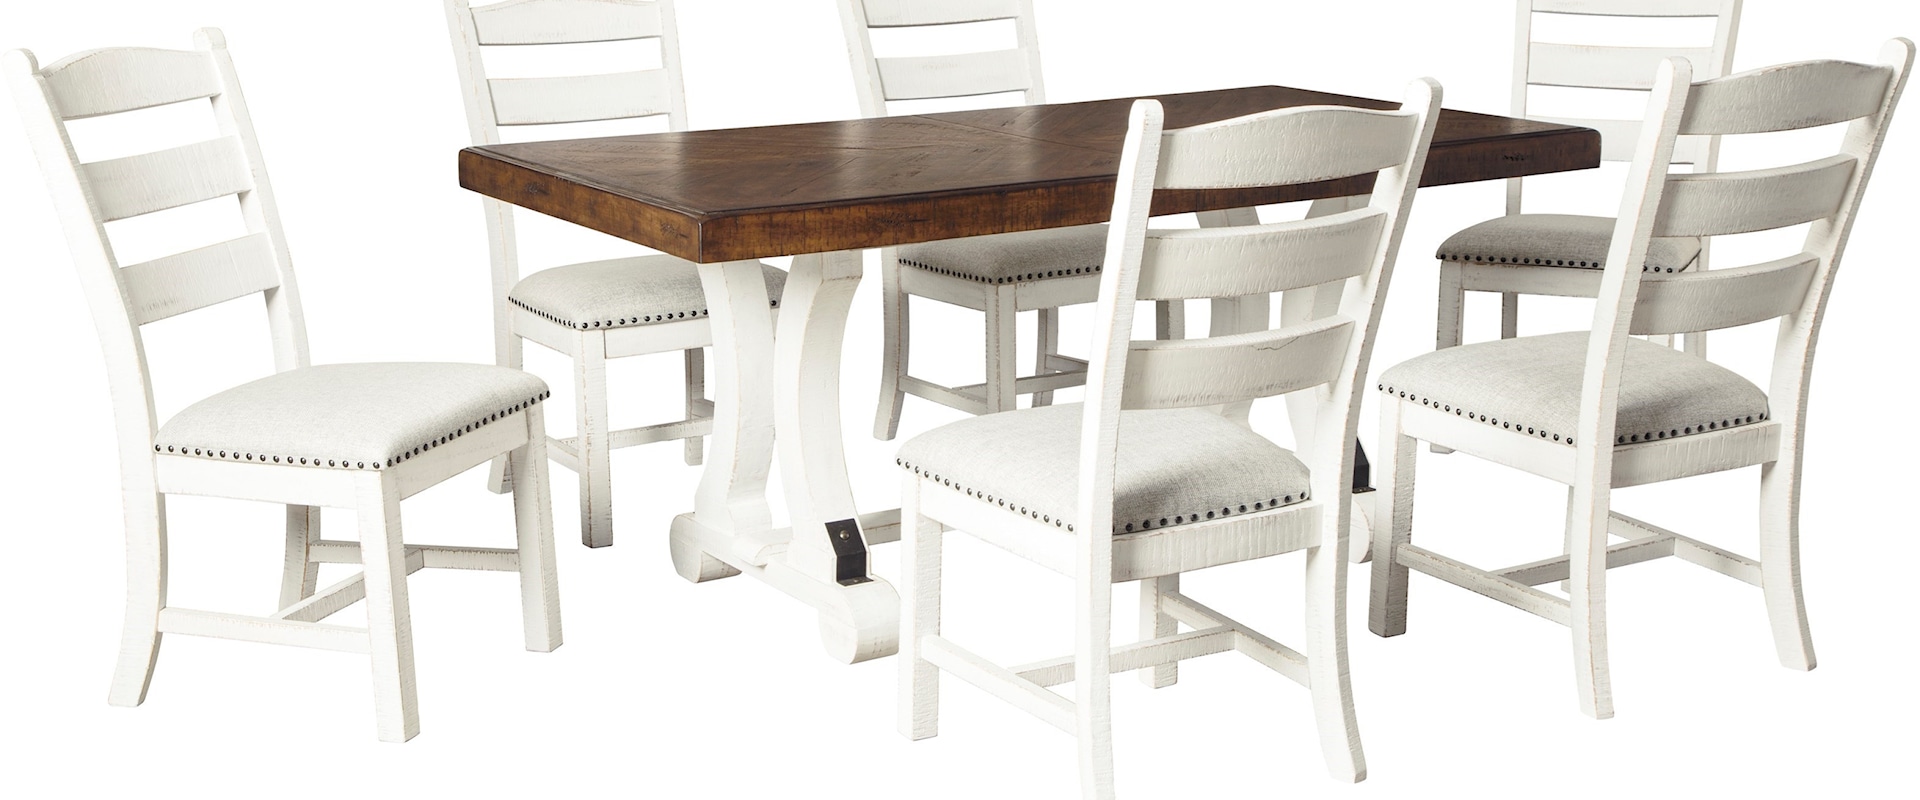 7-Piece Table and Chair Set